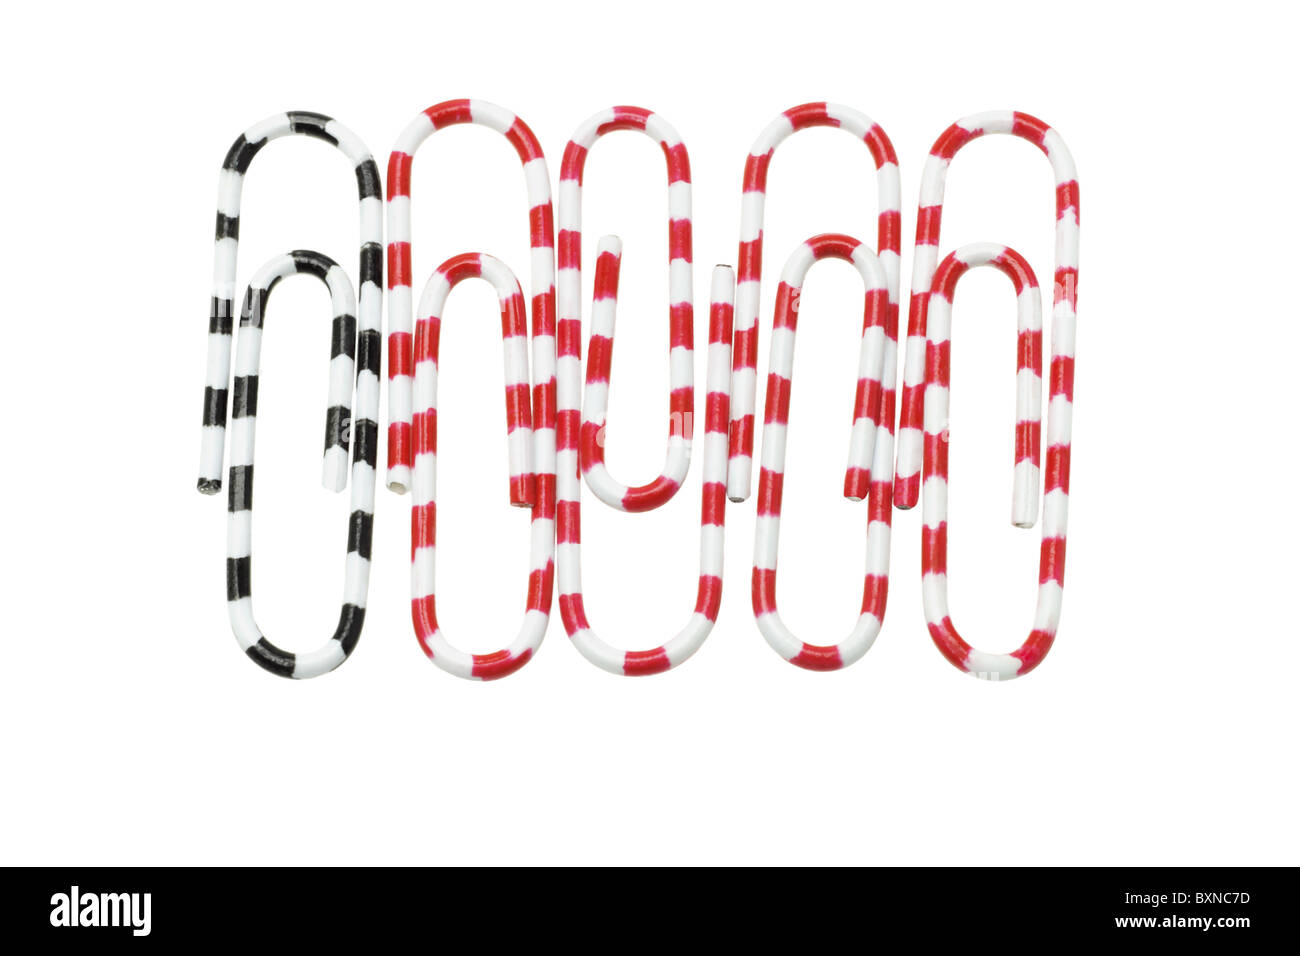 Paper clips with black and red zebra stripes on white background Stock Photo